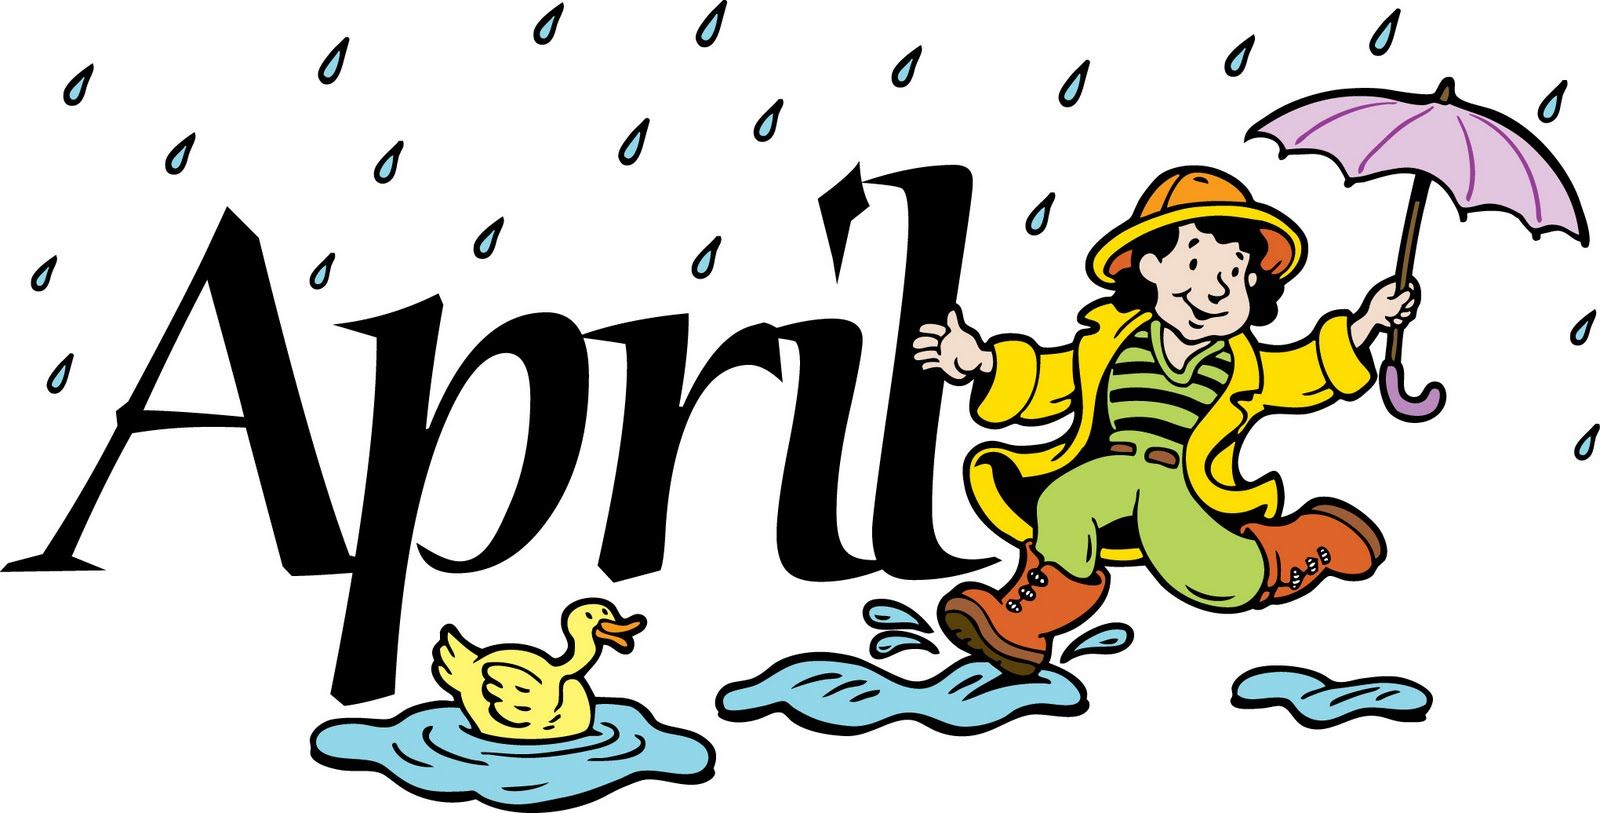 months of the year clipart april